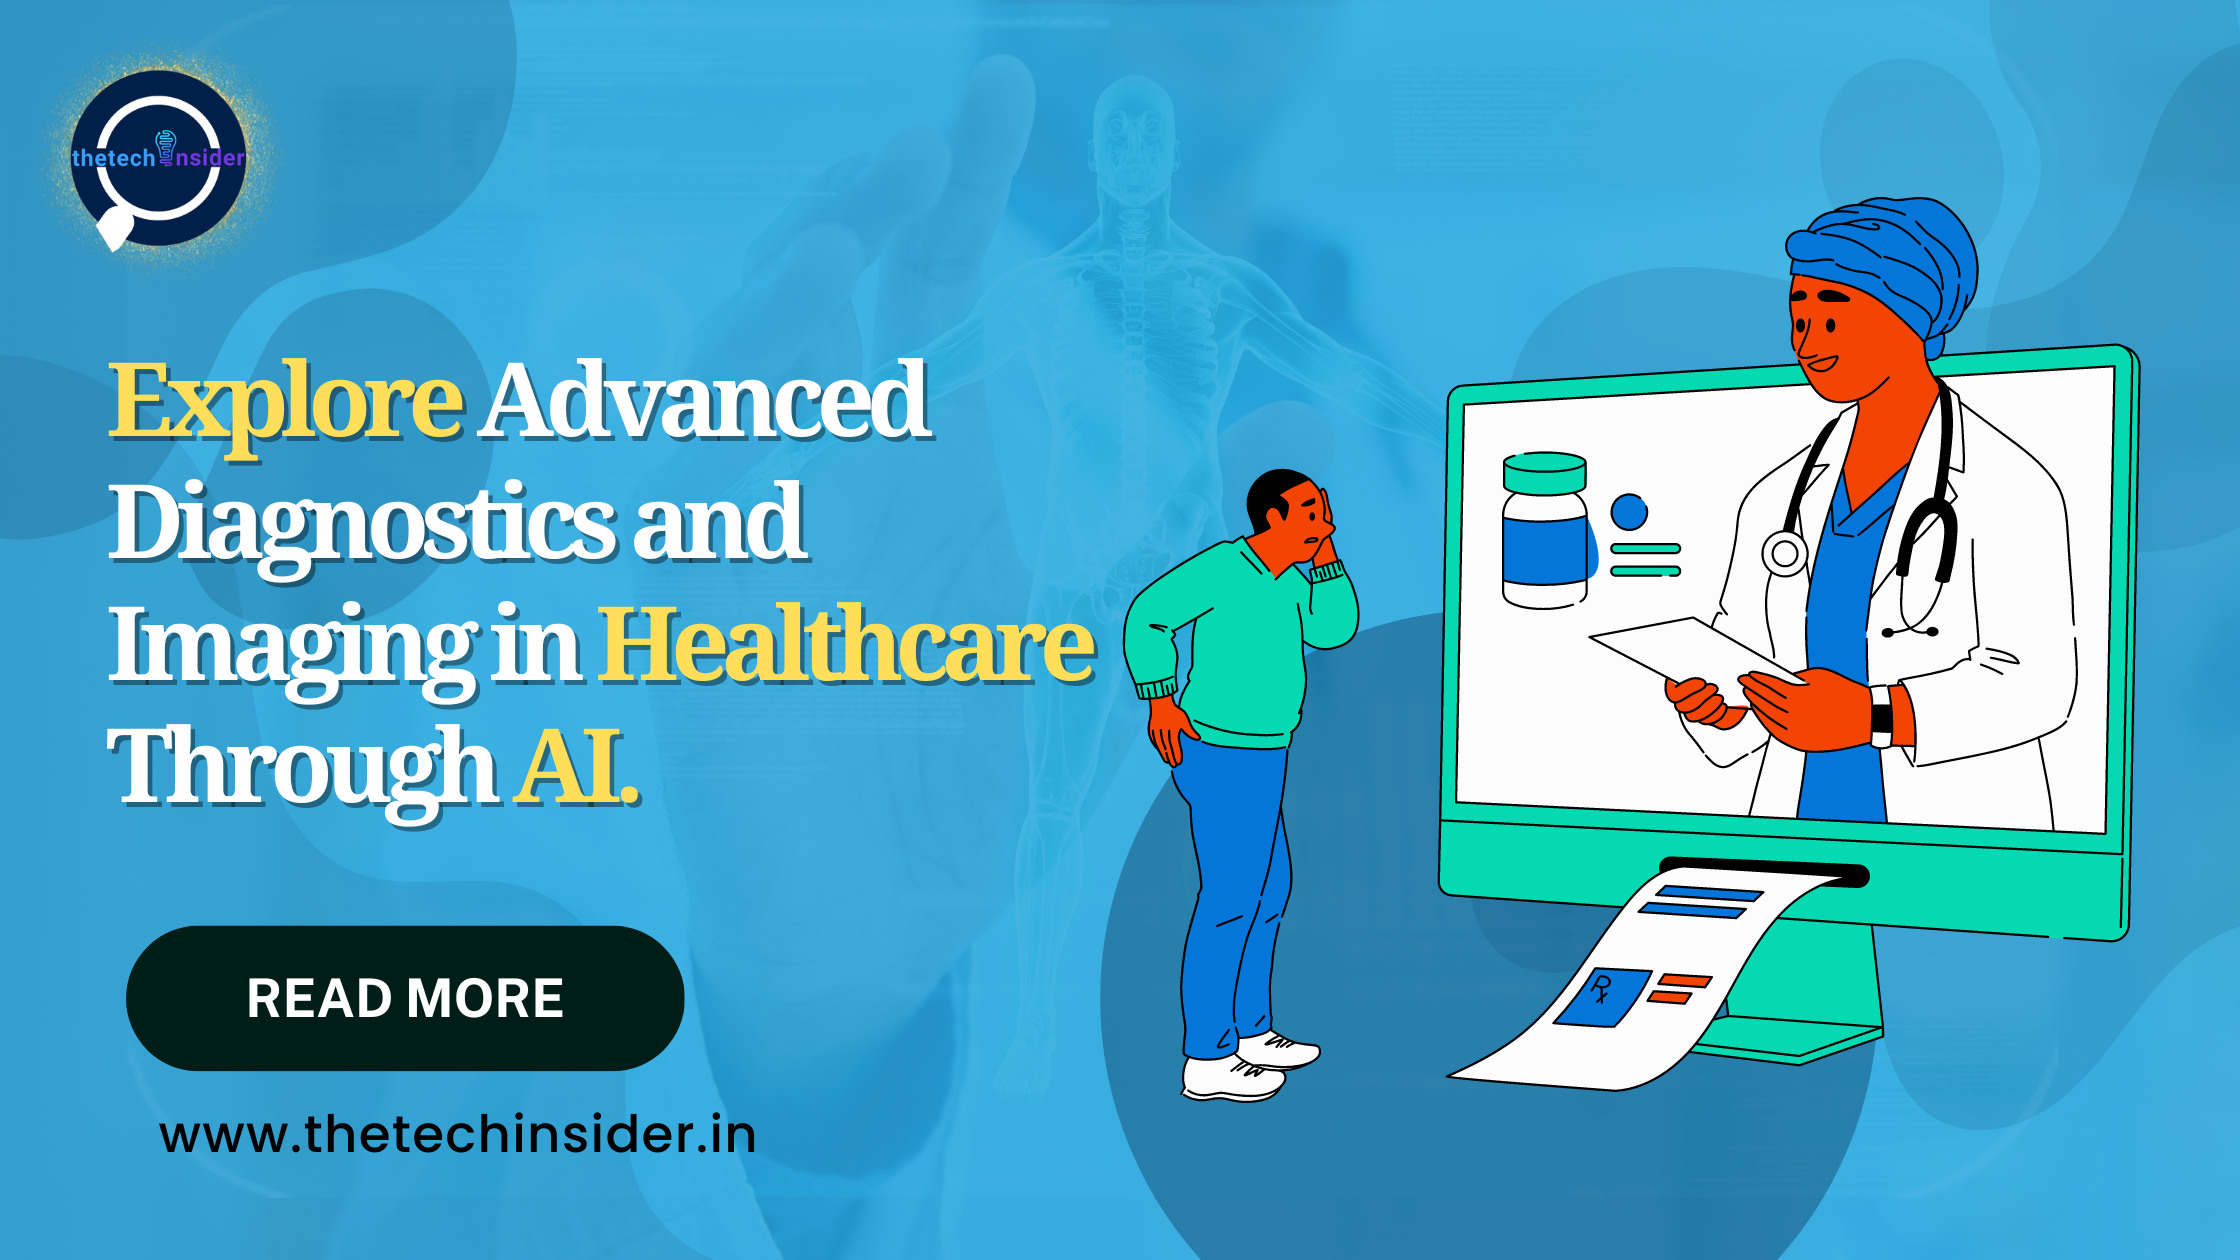 The transformative impact of AI in healthcare through Advanced Diagnostics and Imaging. Explore the benefits of reshaping the Healthcare industry through AI.